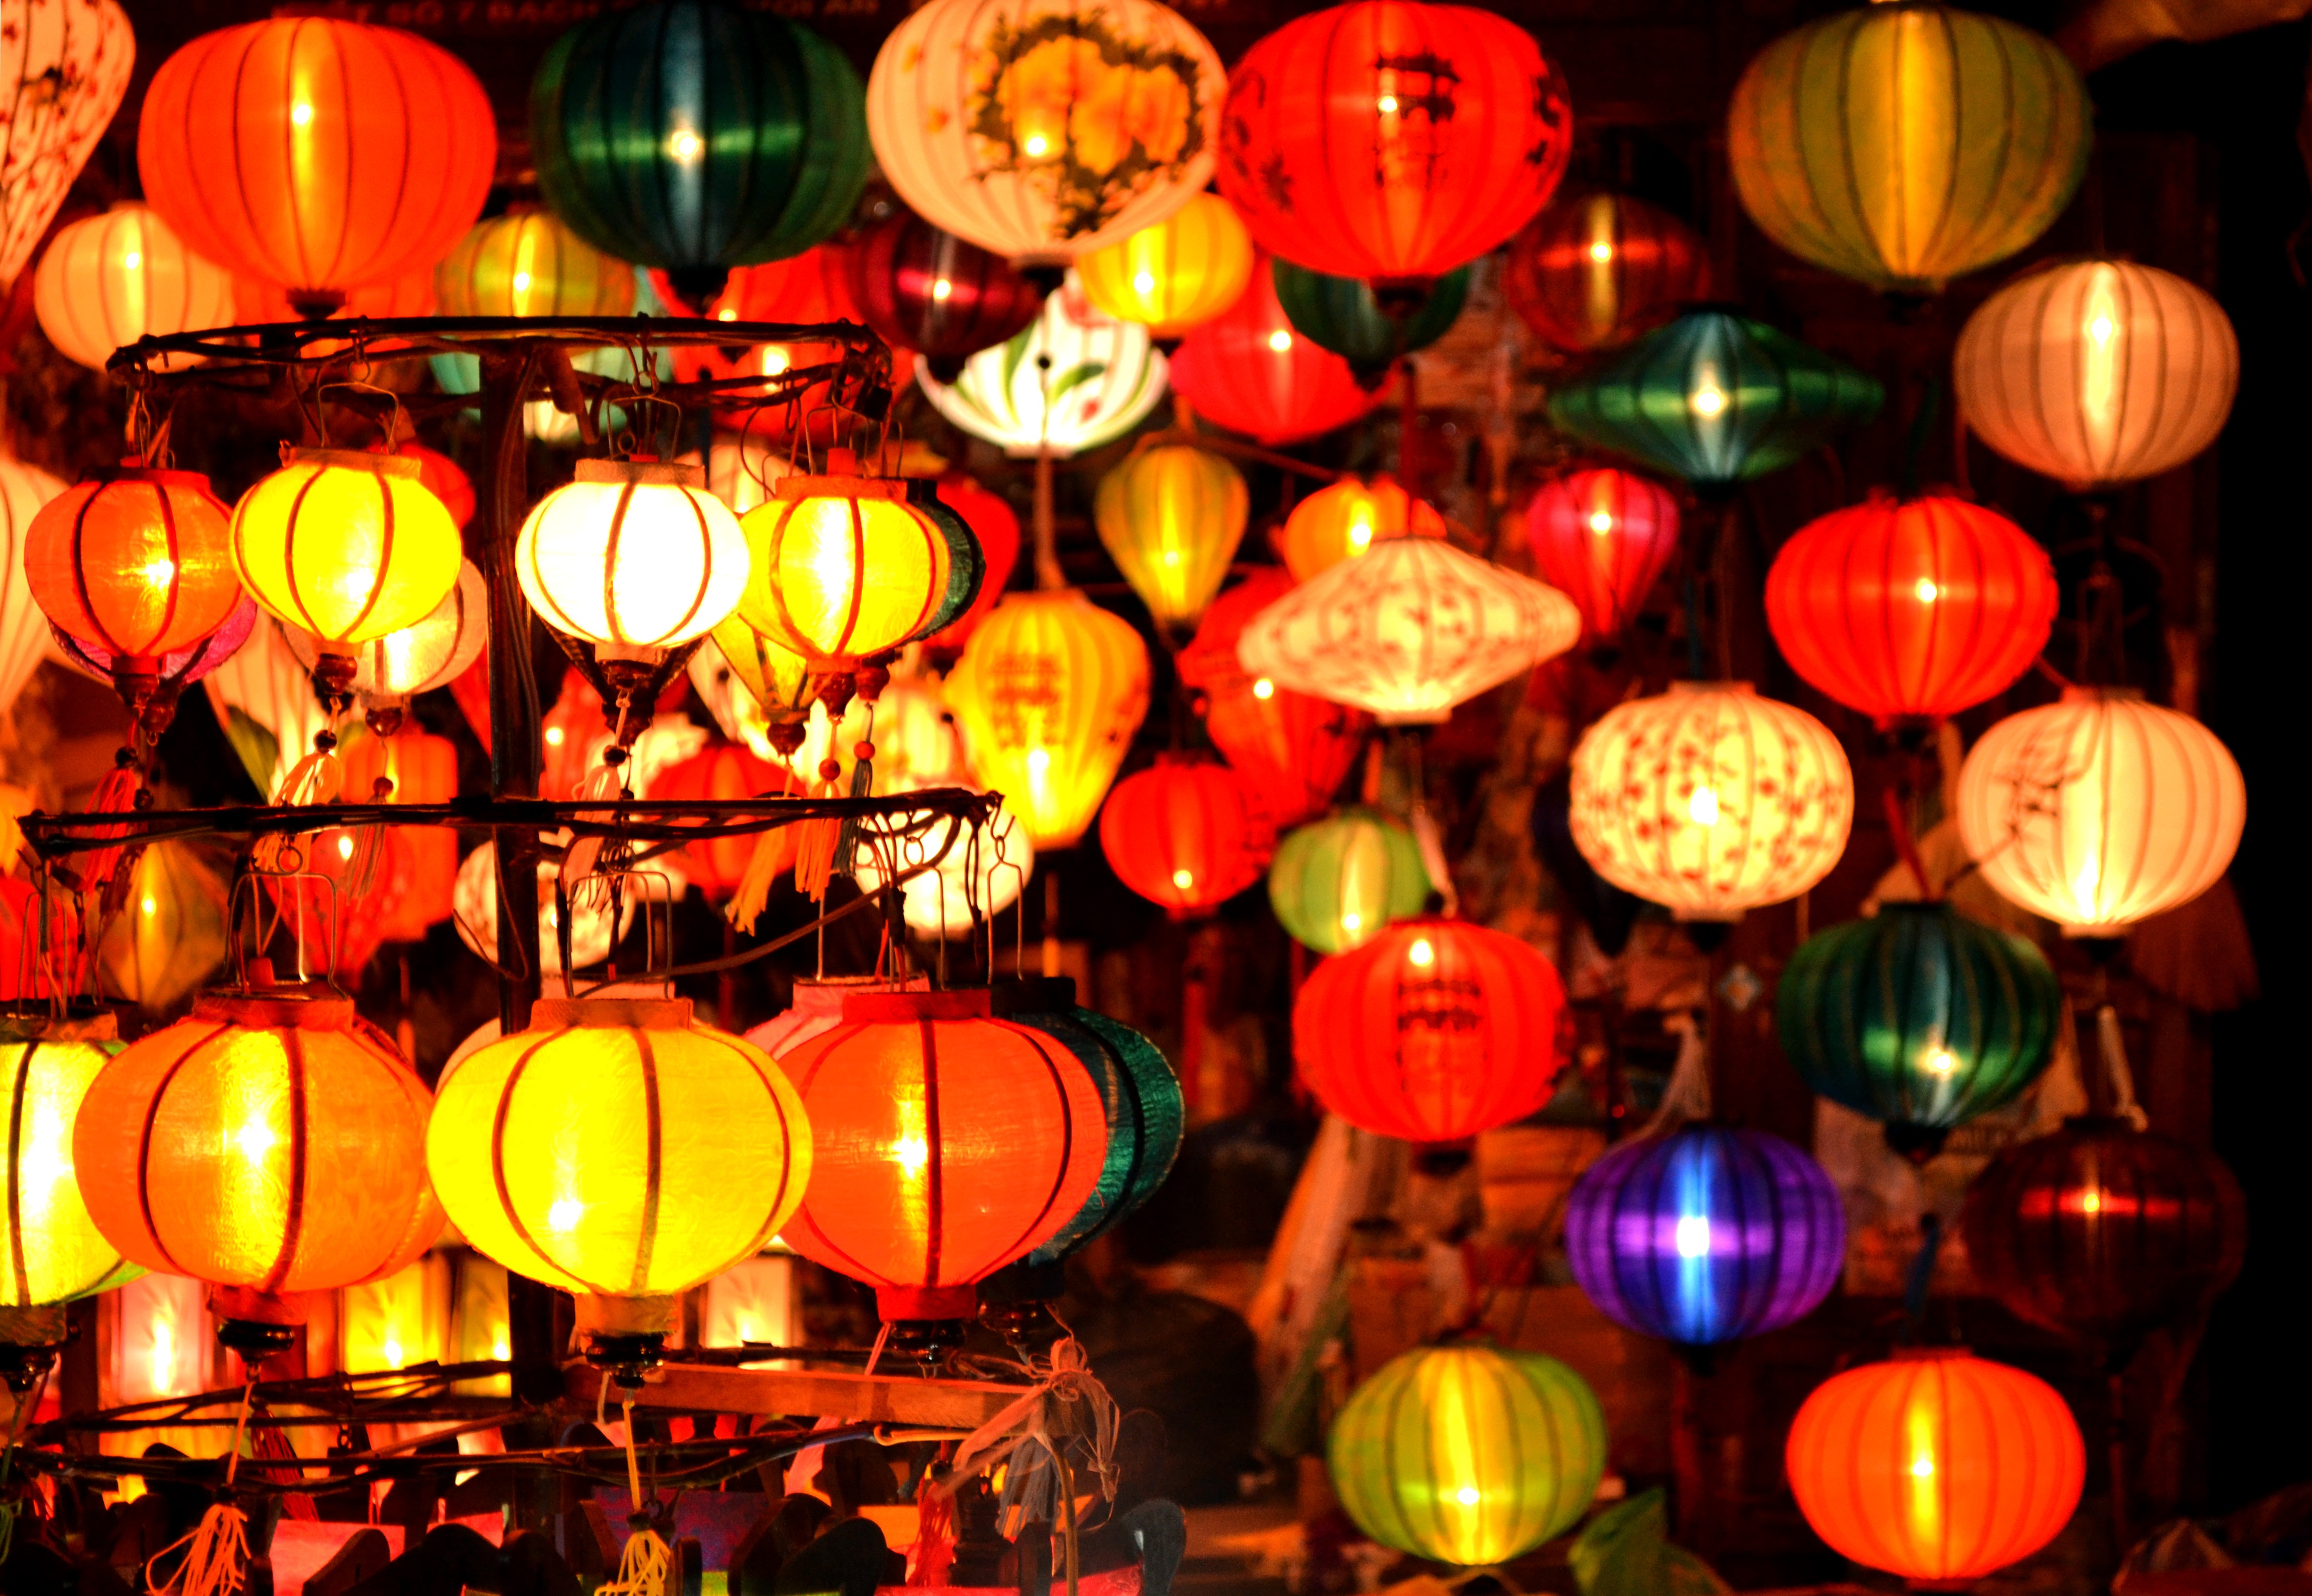 Free Image, light, colourful, color, holiday, lighting, lanterns, event, vietnam, mid autumn festival, hoi an, night market 4254x2937